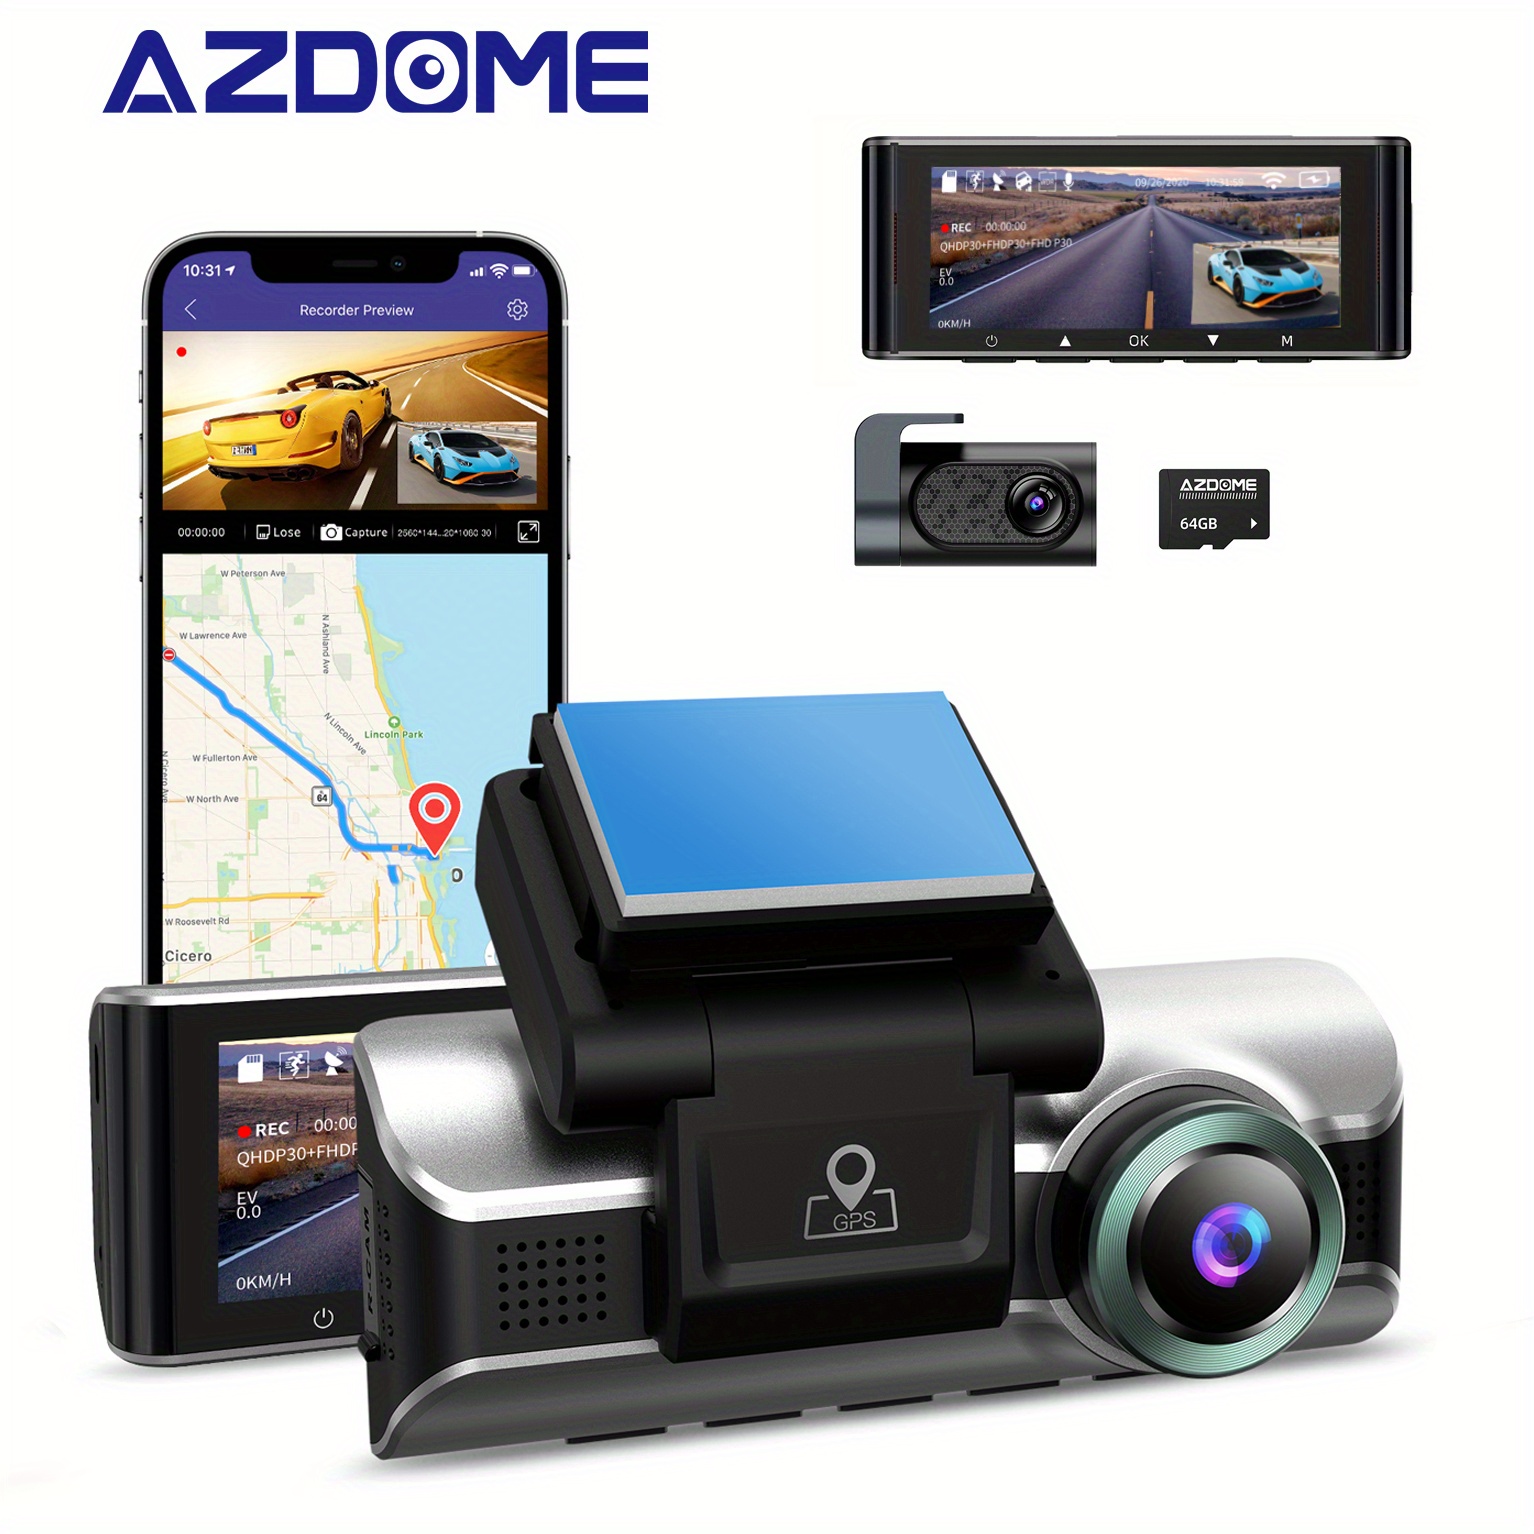 AZDOME GS63H 4K Dash Cam, Built-in WiFi GPS Dash Camera for Cars, 2160P UHD  Full HD Car Dashboard Camera Recorder, 2.4″ IPS Screen, WDR Night Vision,  170° Wide Angle, 24H Parking Mode 